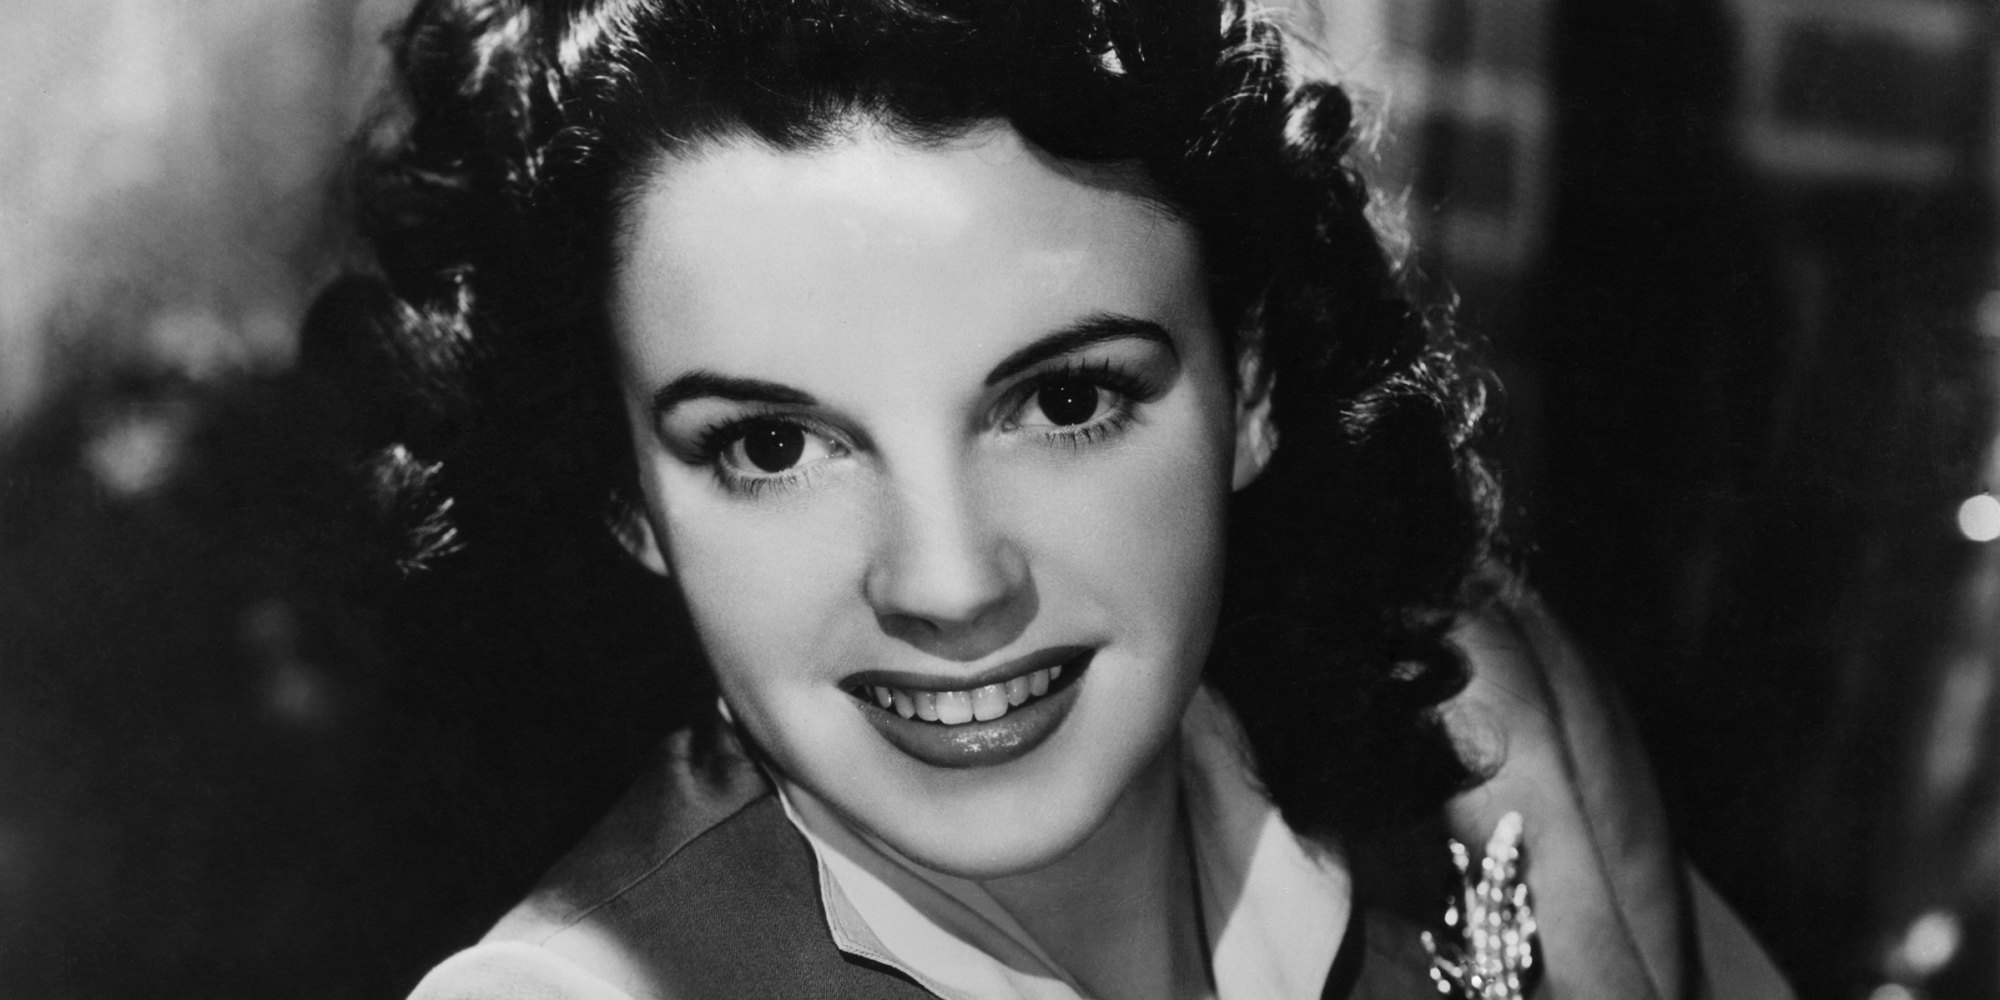 Judy Garland Celebrated With 'Night Of A Thousand Judys' Benefit For Homeless LGBT Youth